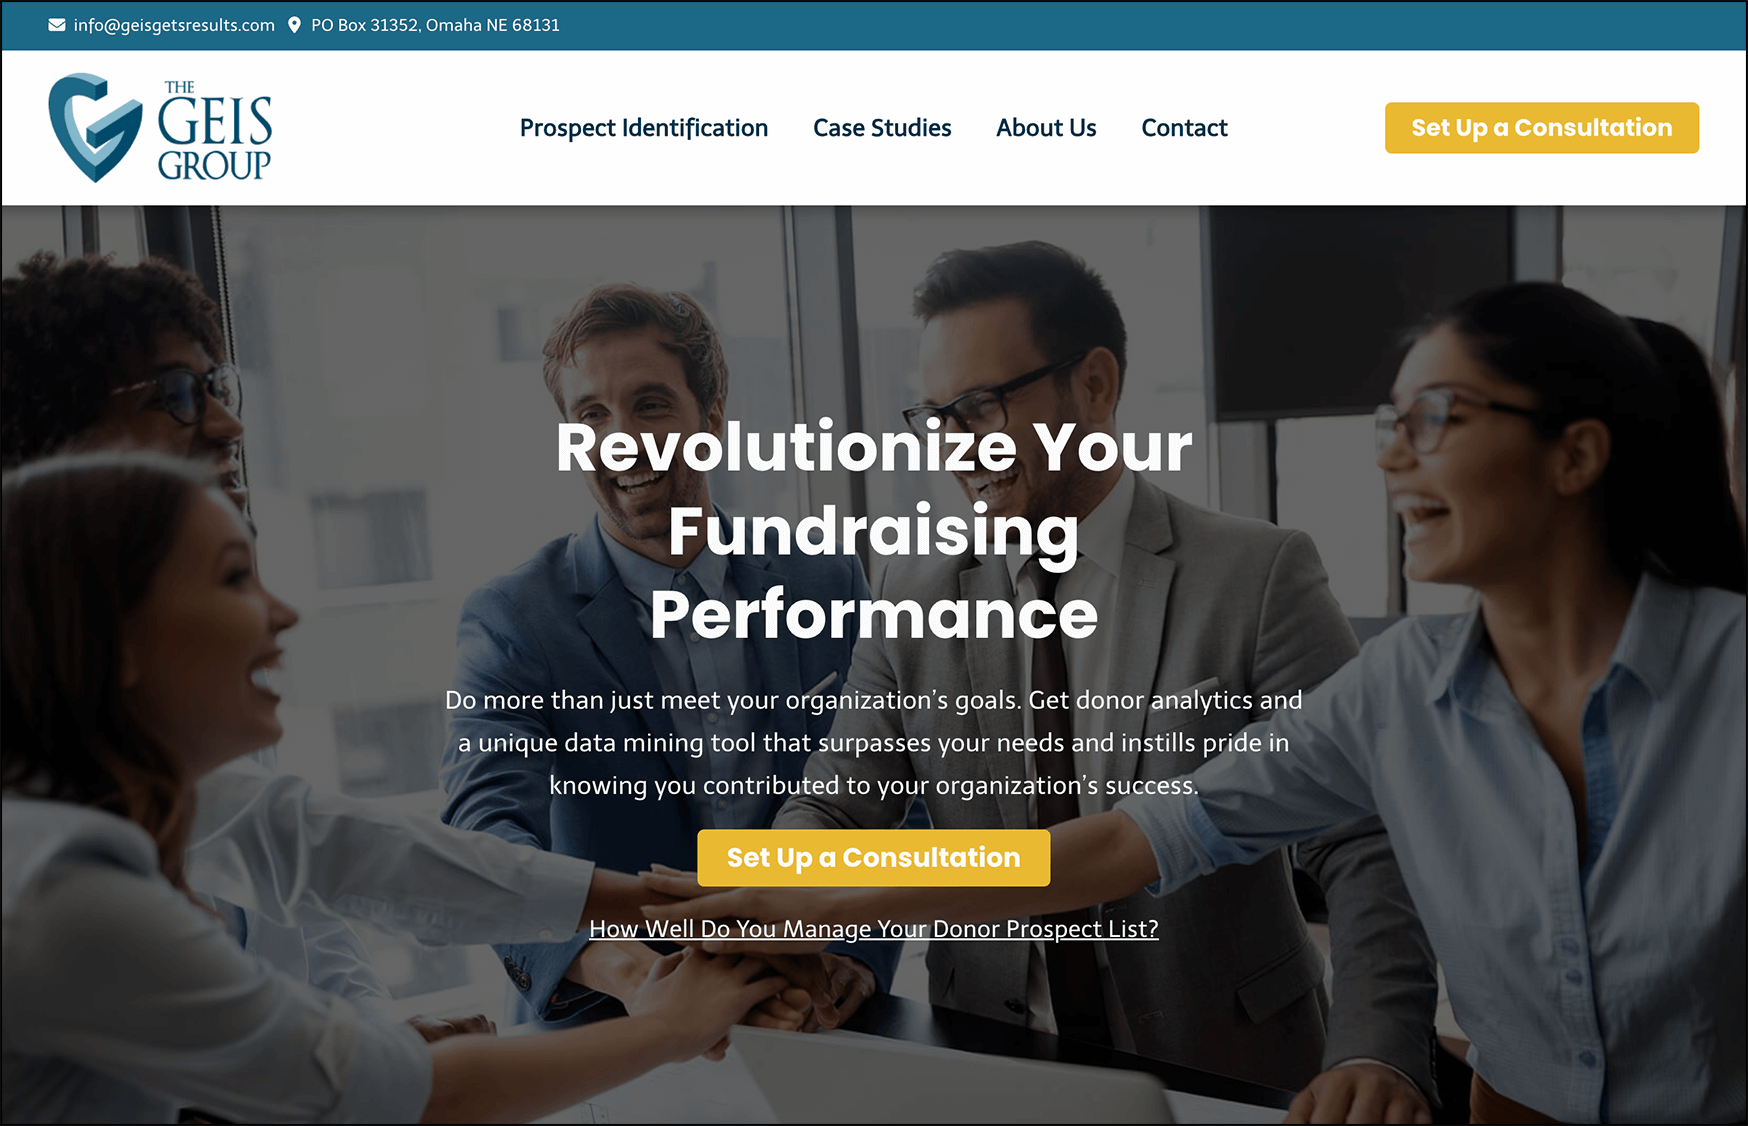 The Geis Group is a top fundraising consulting firm. 